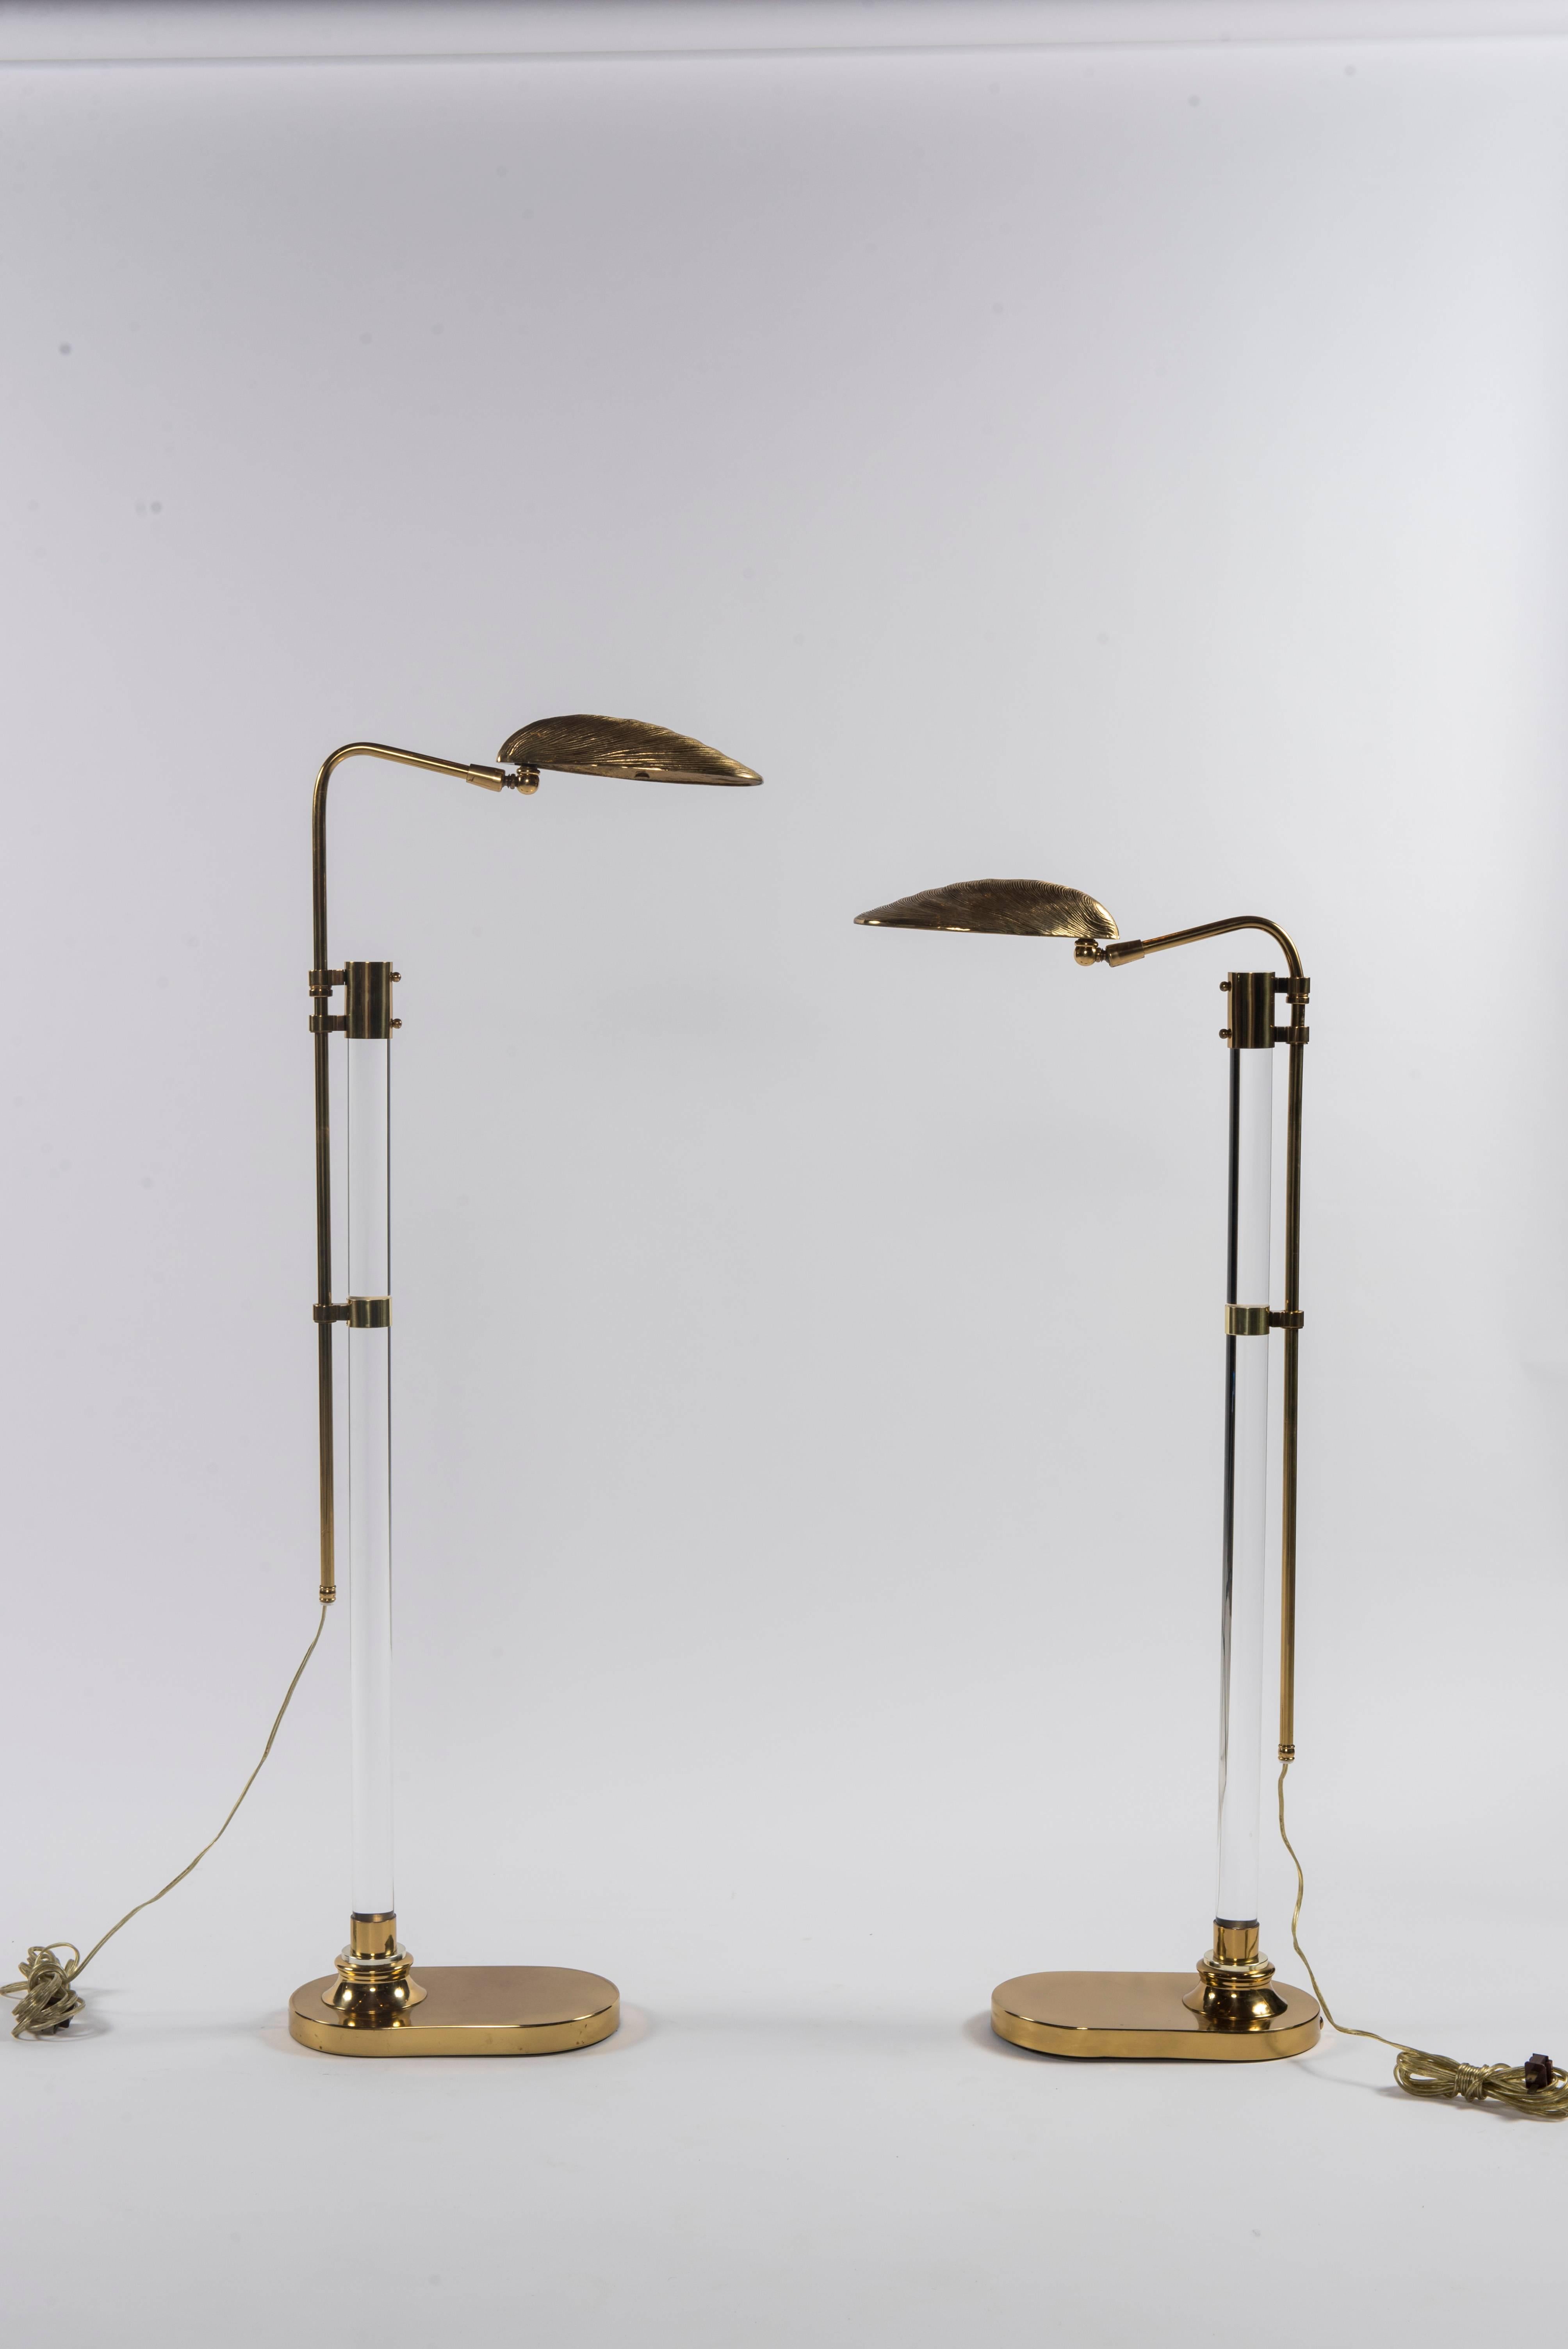 A chic pair of lucite and brass clam shell floor lamps. The lamp heads pivot and the height is adjustable.